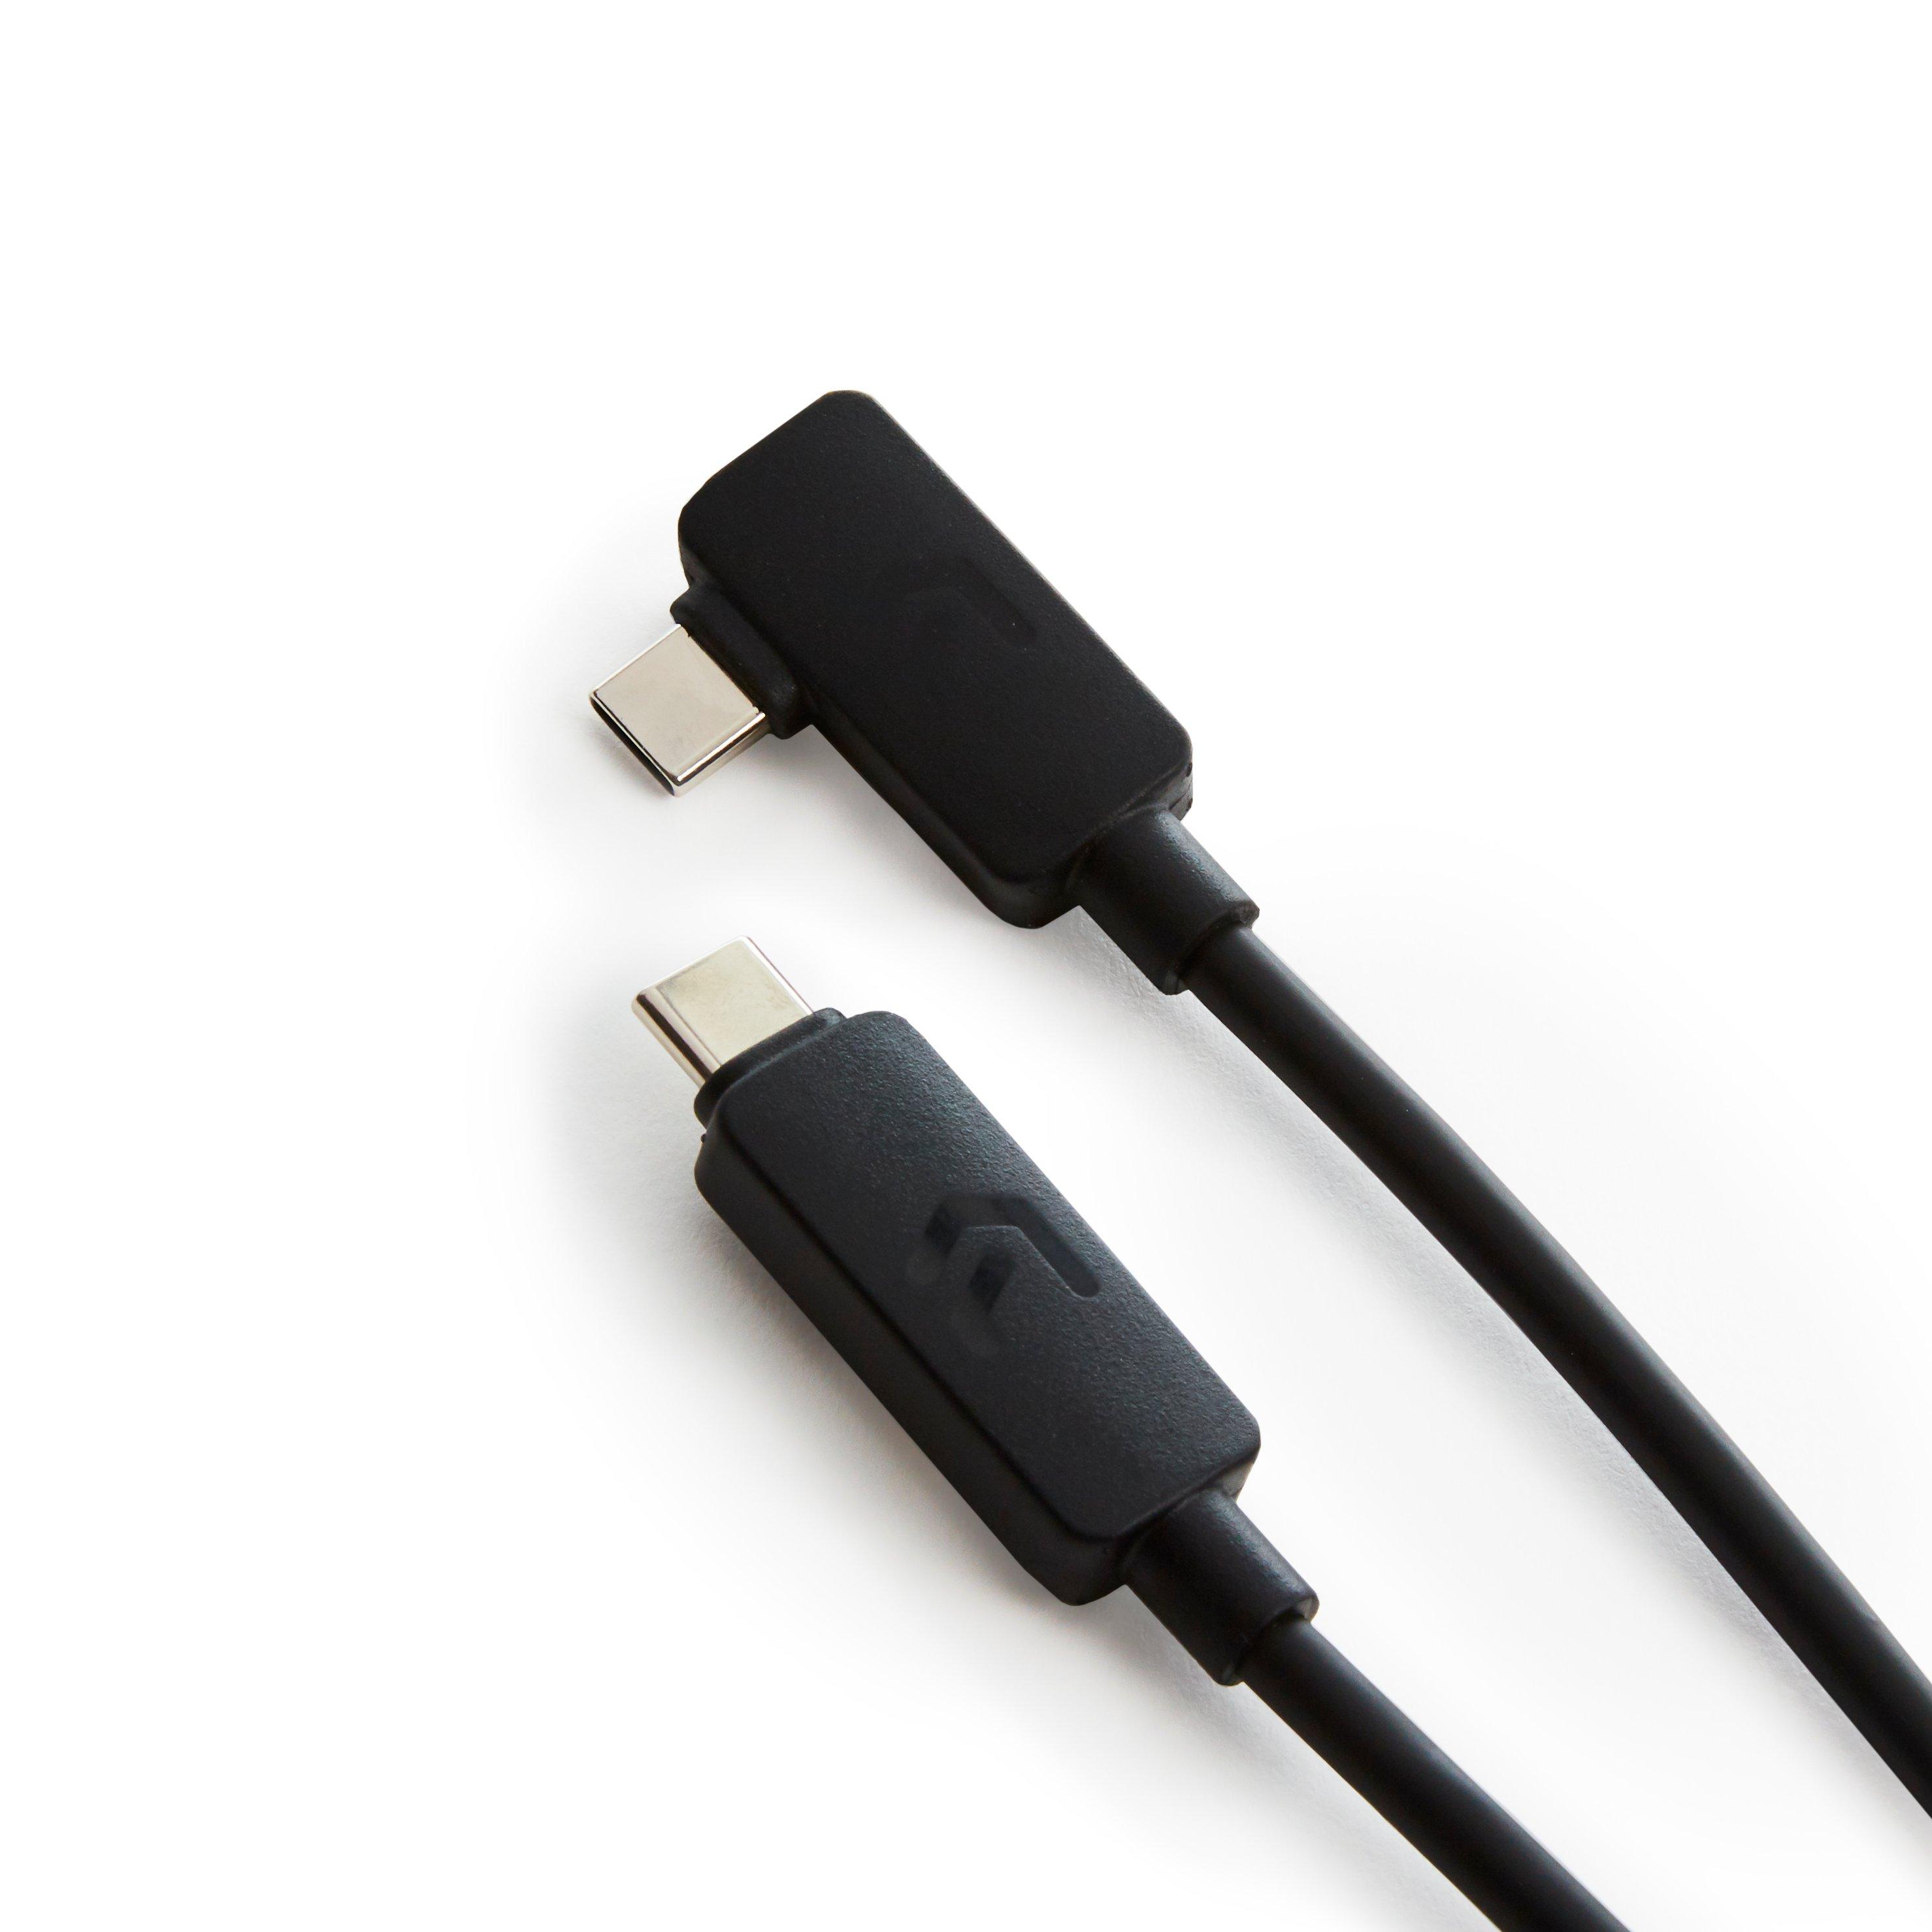 Which USB-C Cable Do You Need for the Meta Quest 2 or Meta Quest Pro?